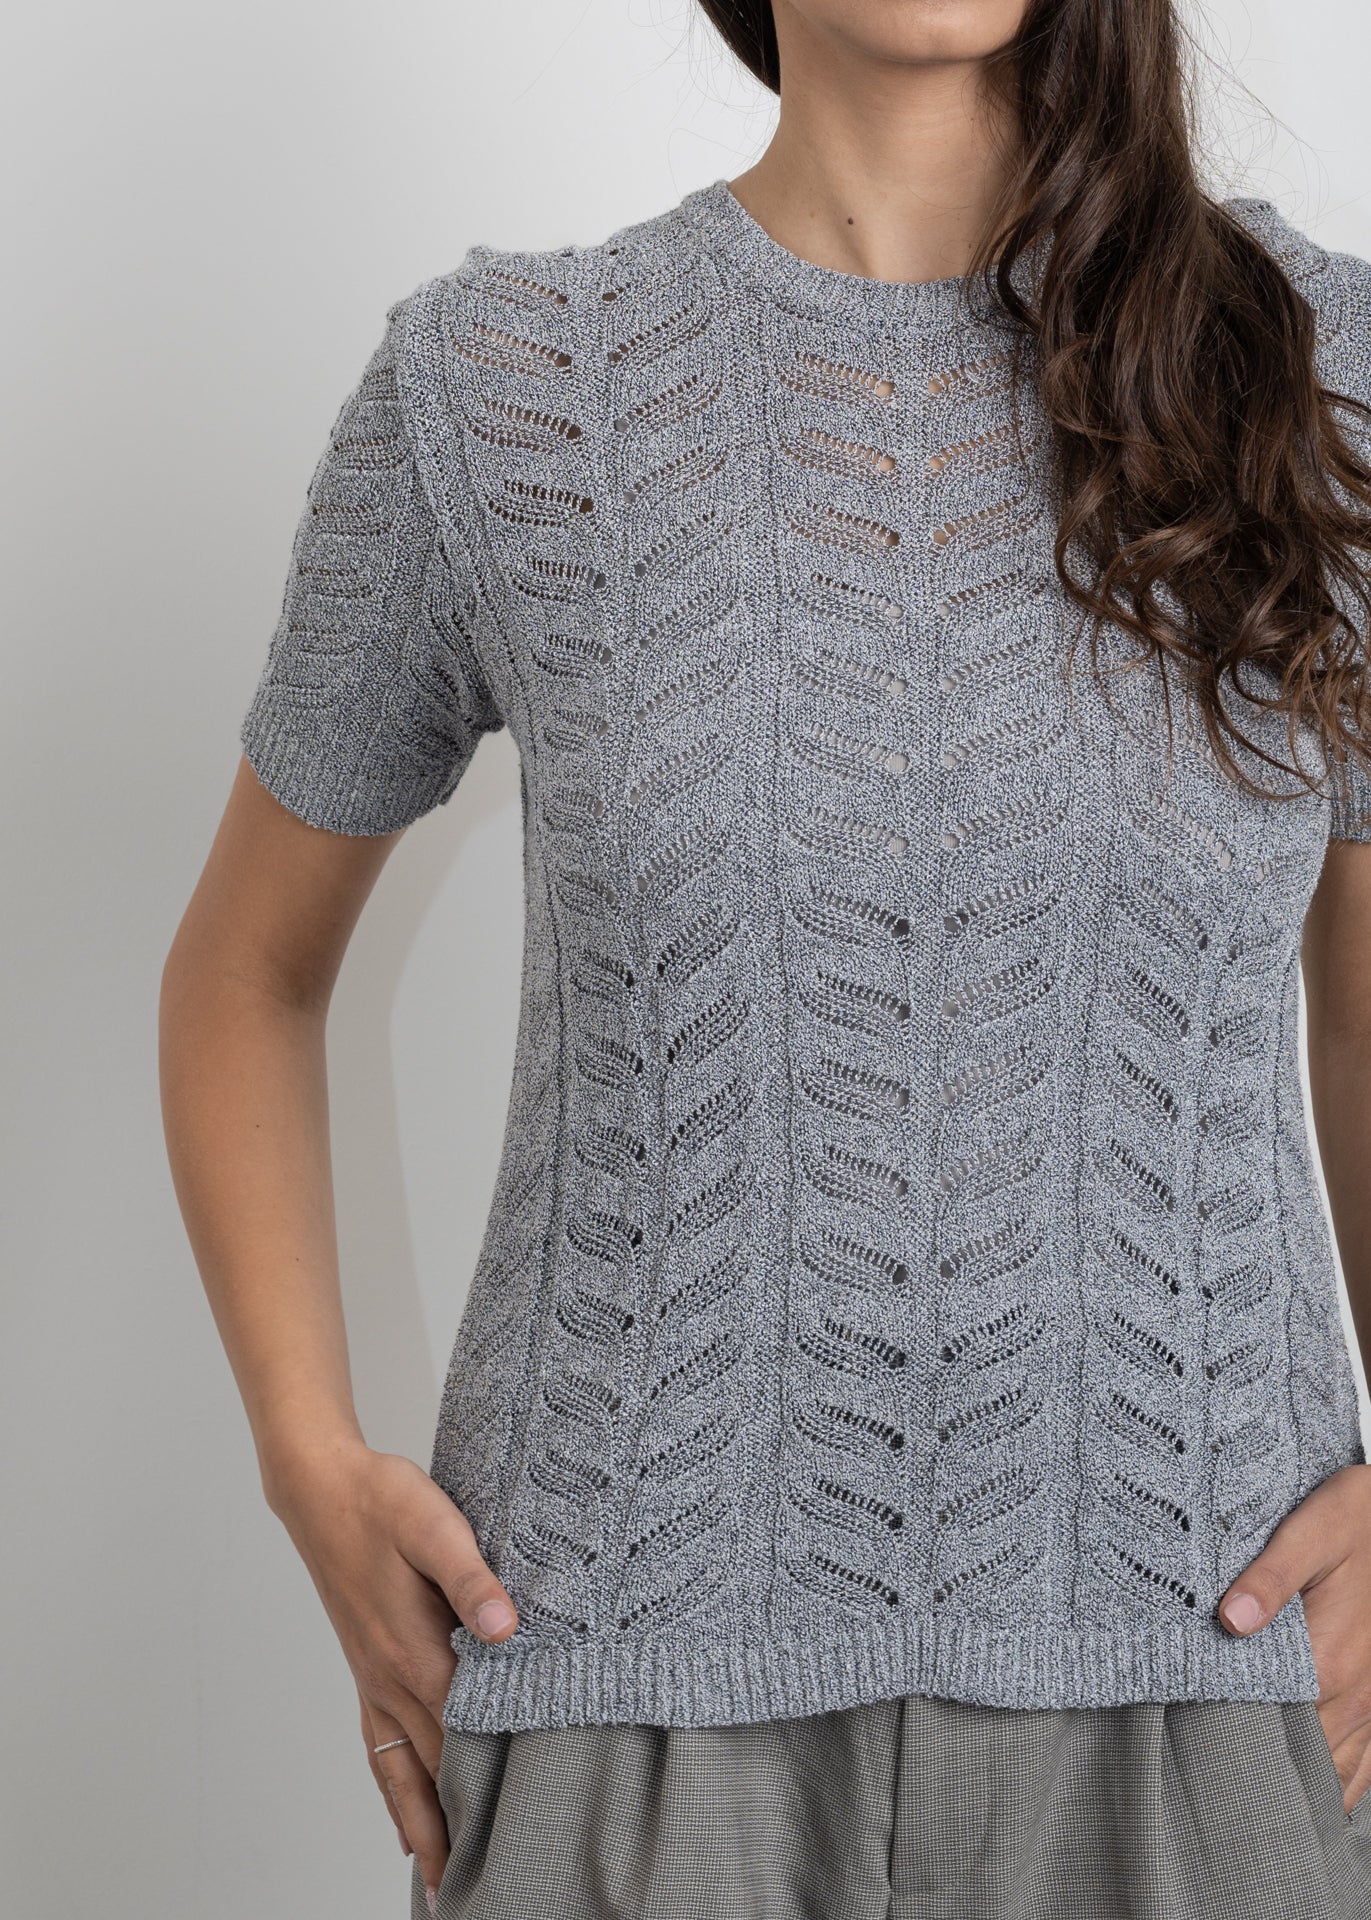 Vintage Grey Knitted Blouse